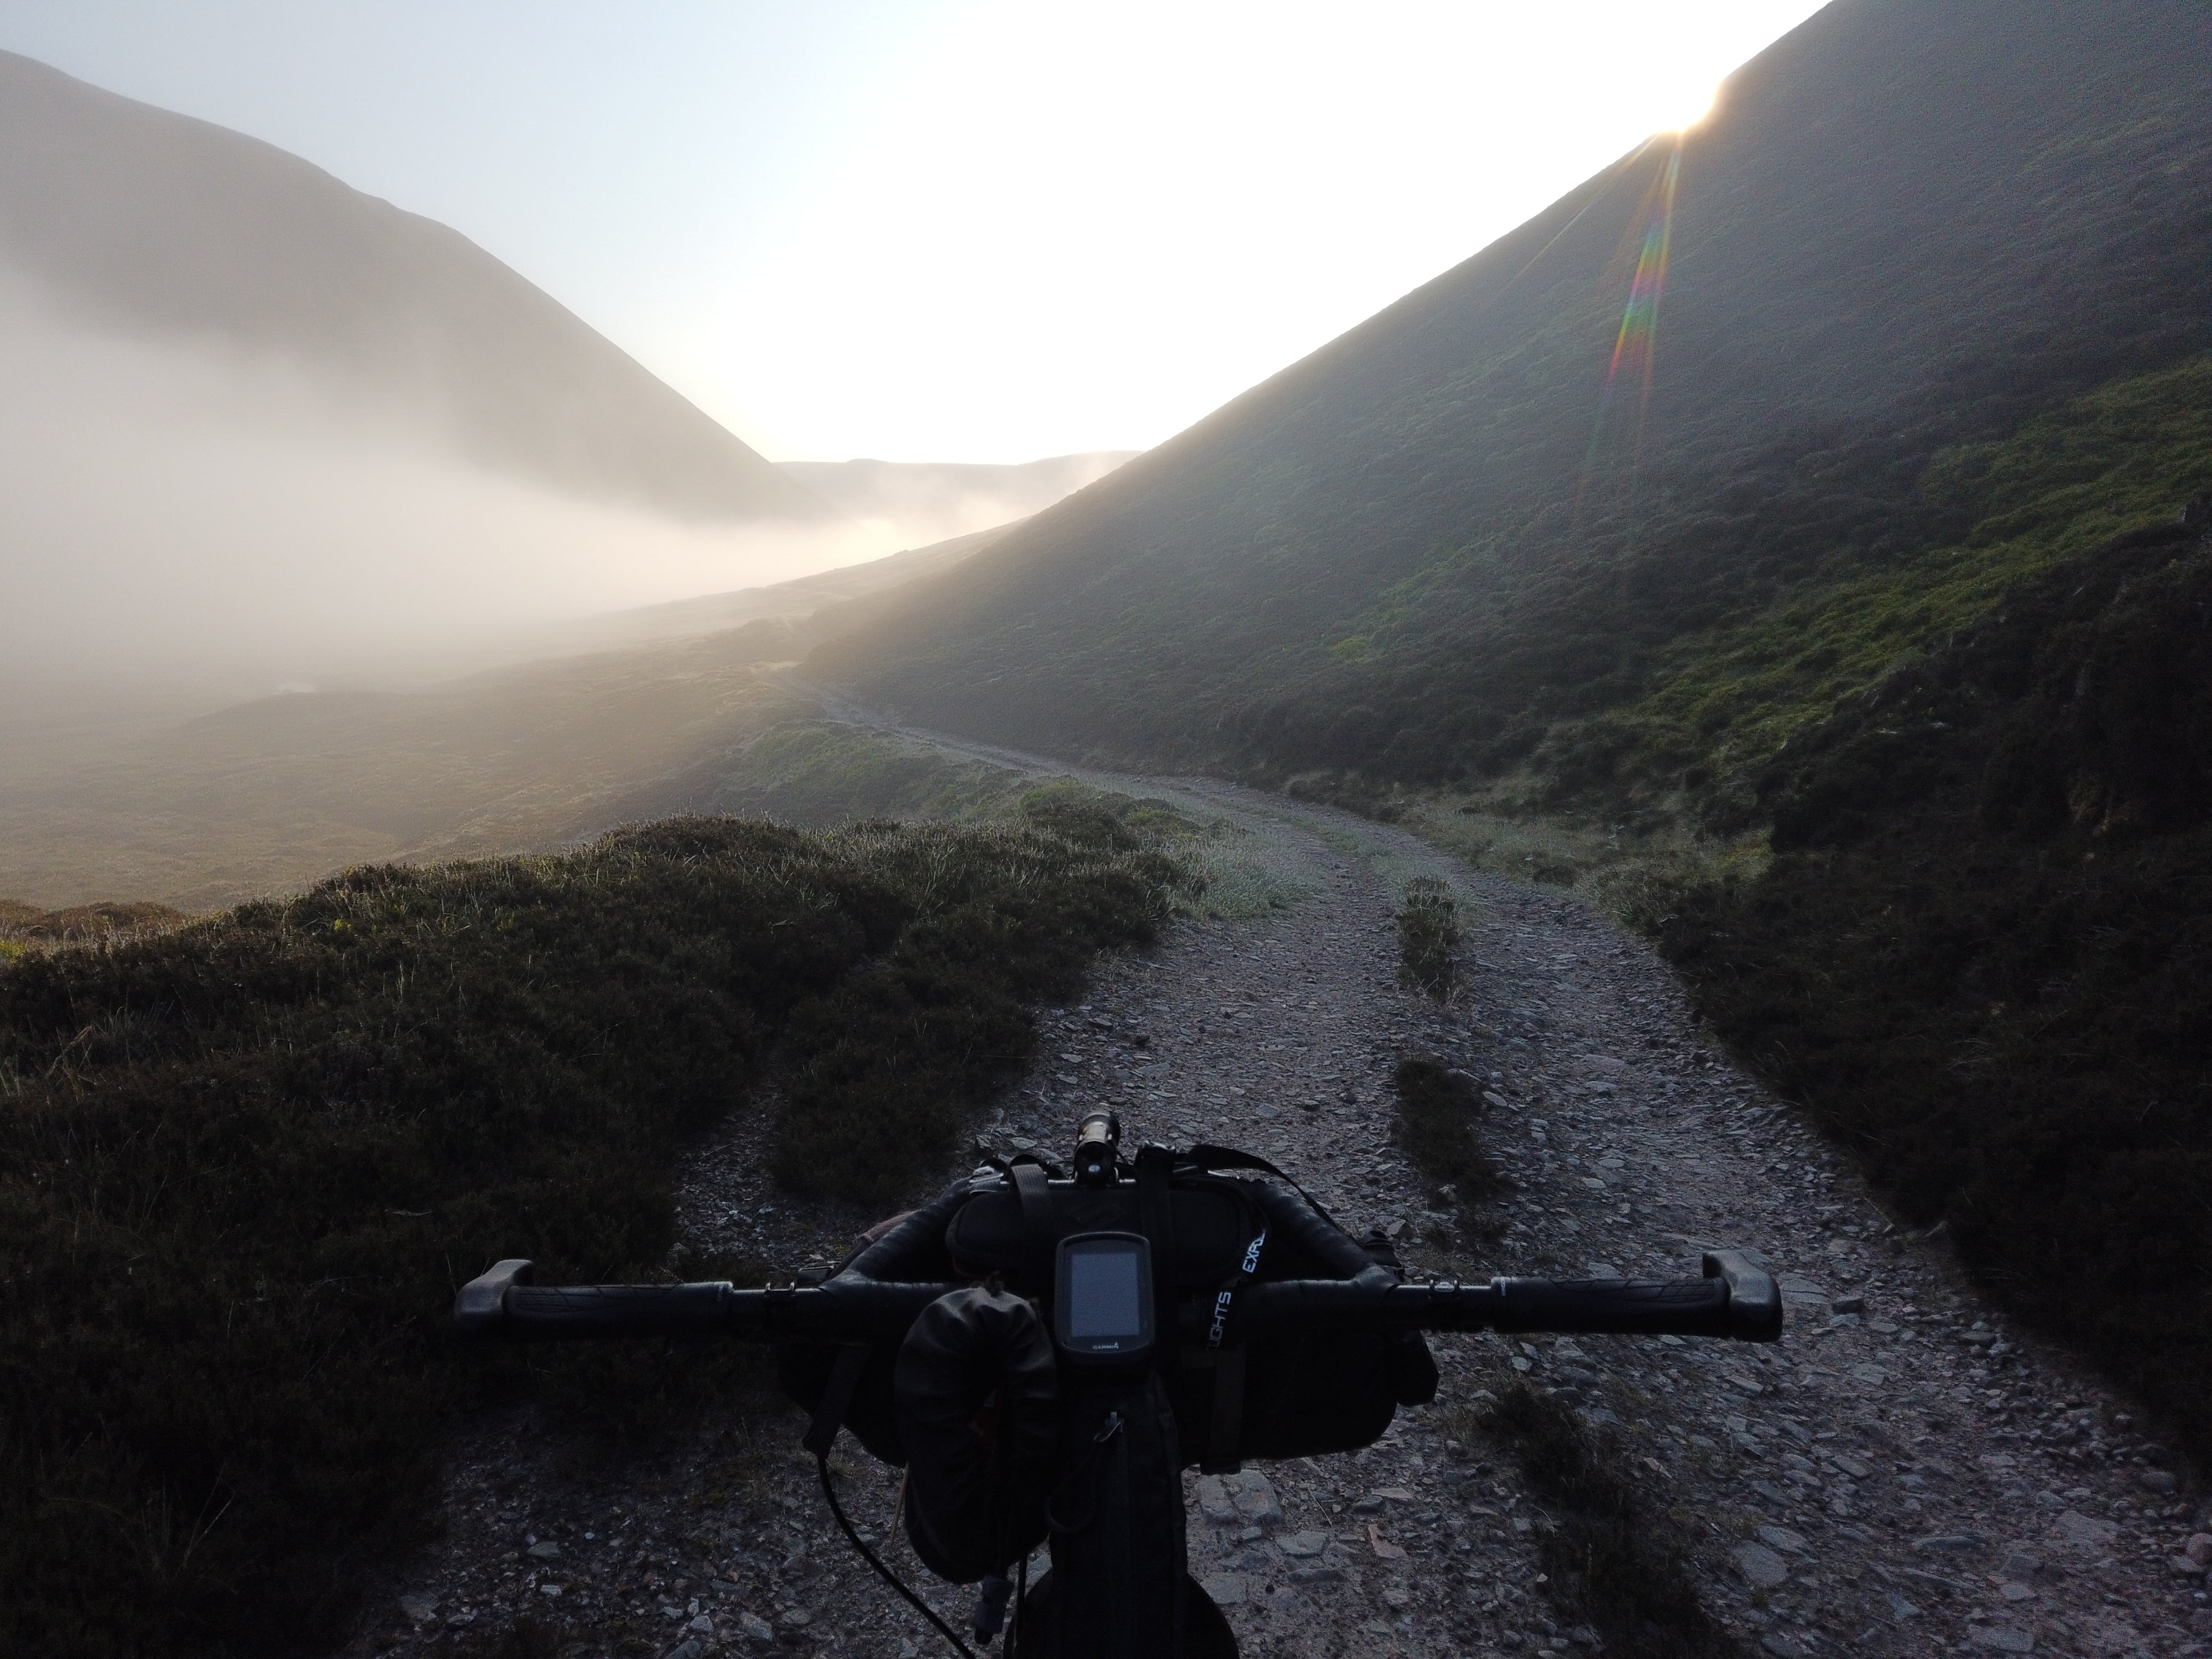 mtb handlebars with a misty view